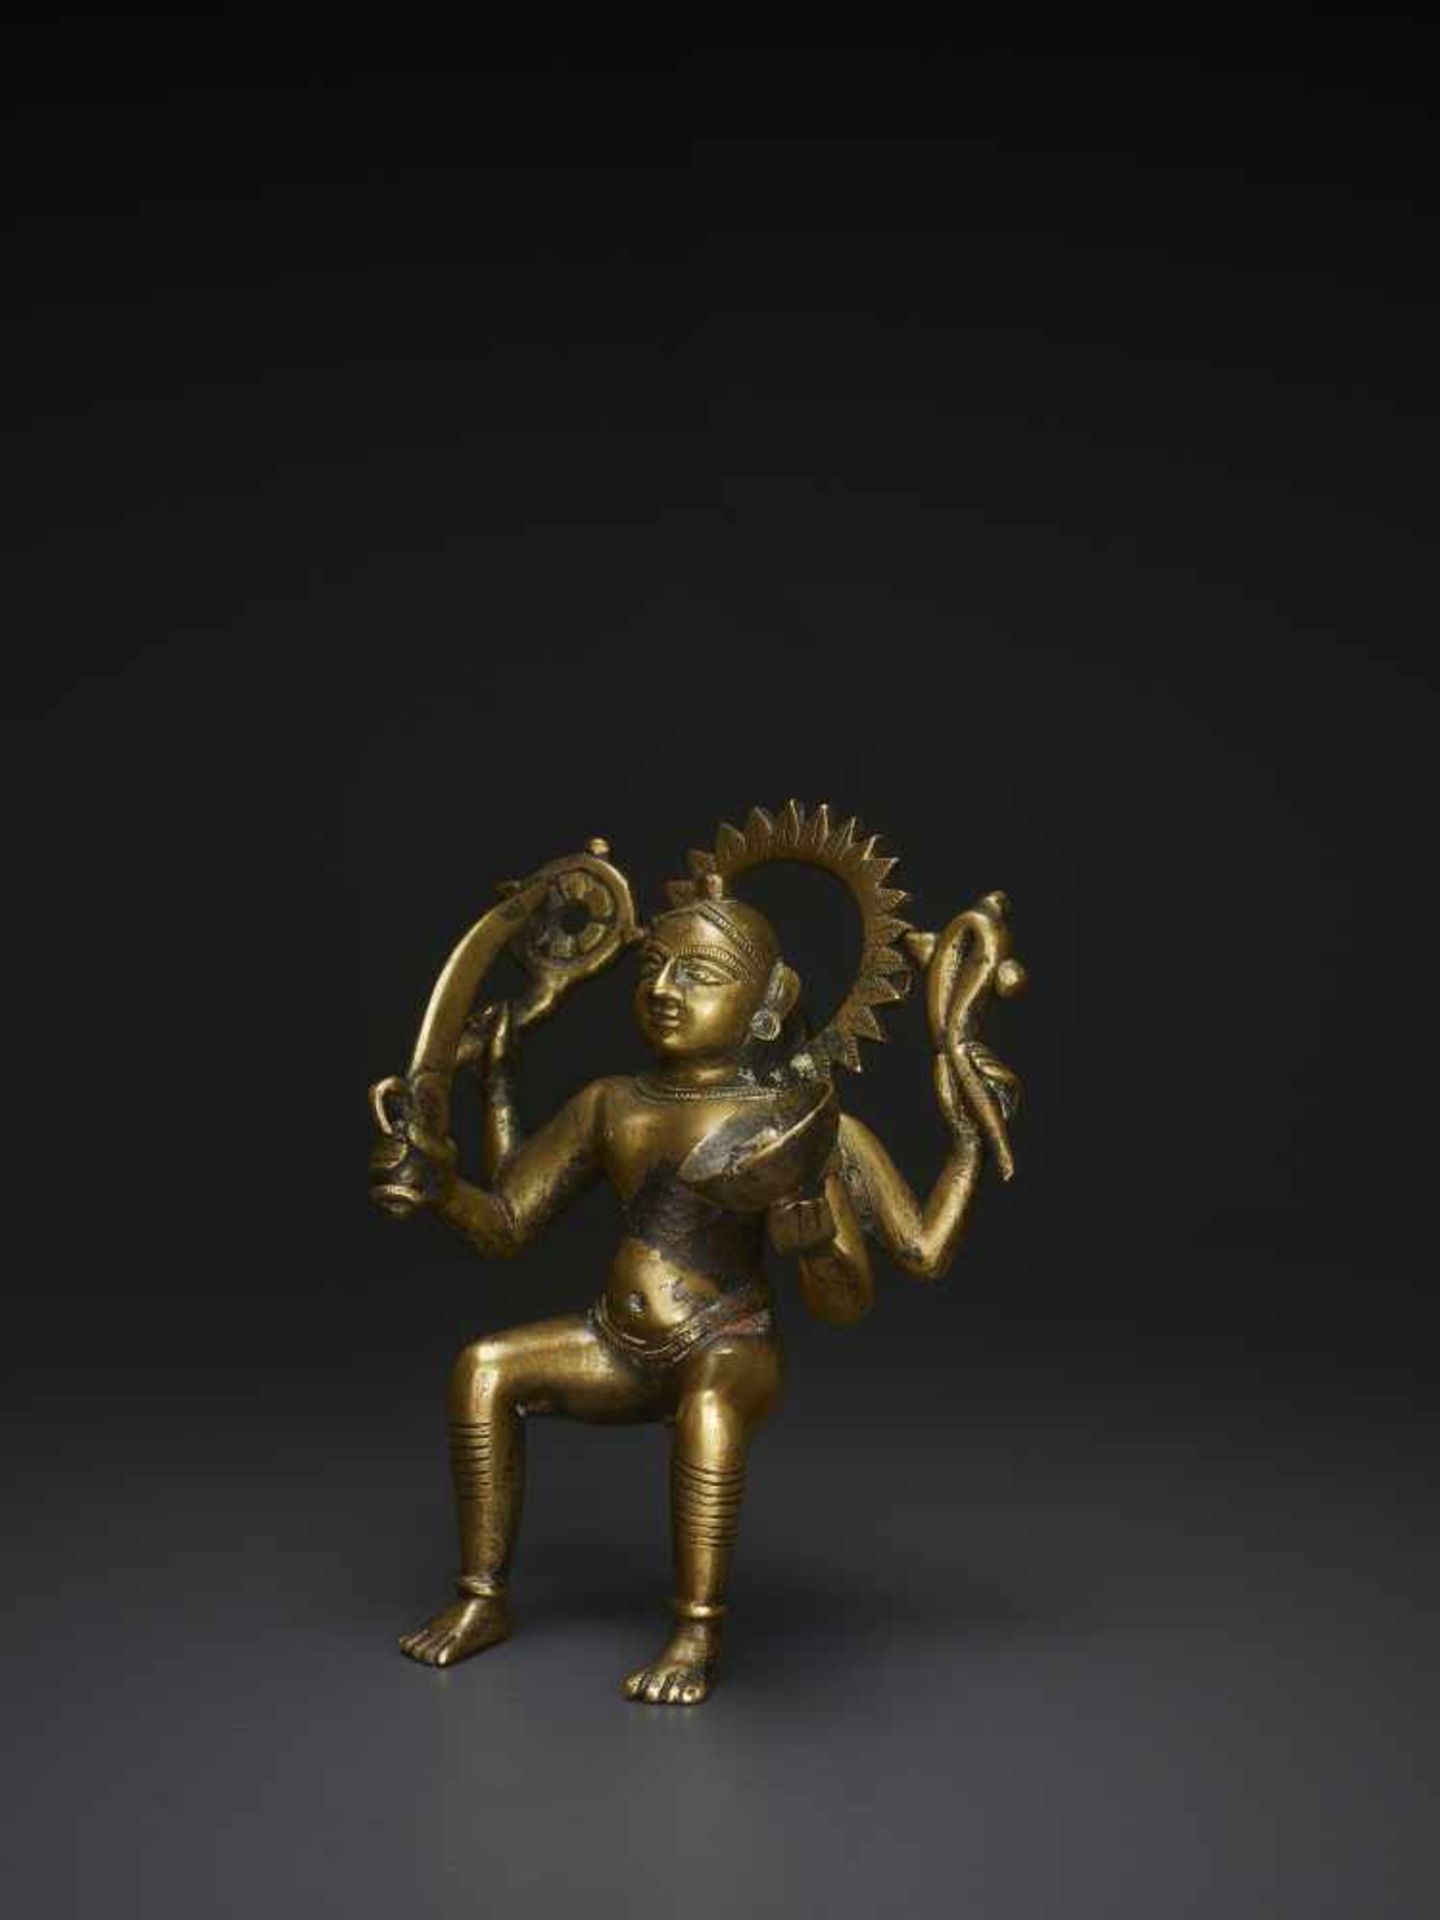 A RARE HINDU BRONZE DEITY India, 17th - 18th century. Finely cast bronze with neatly incised - Image 4 of 6